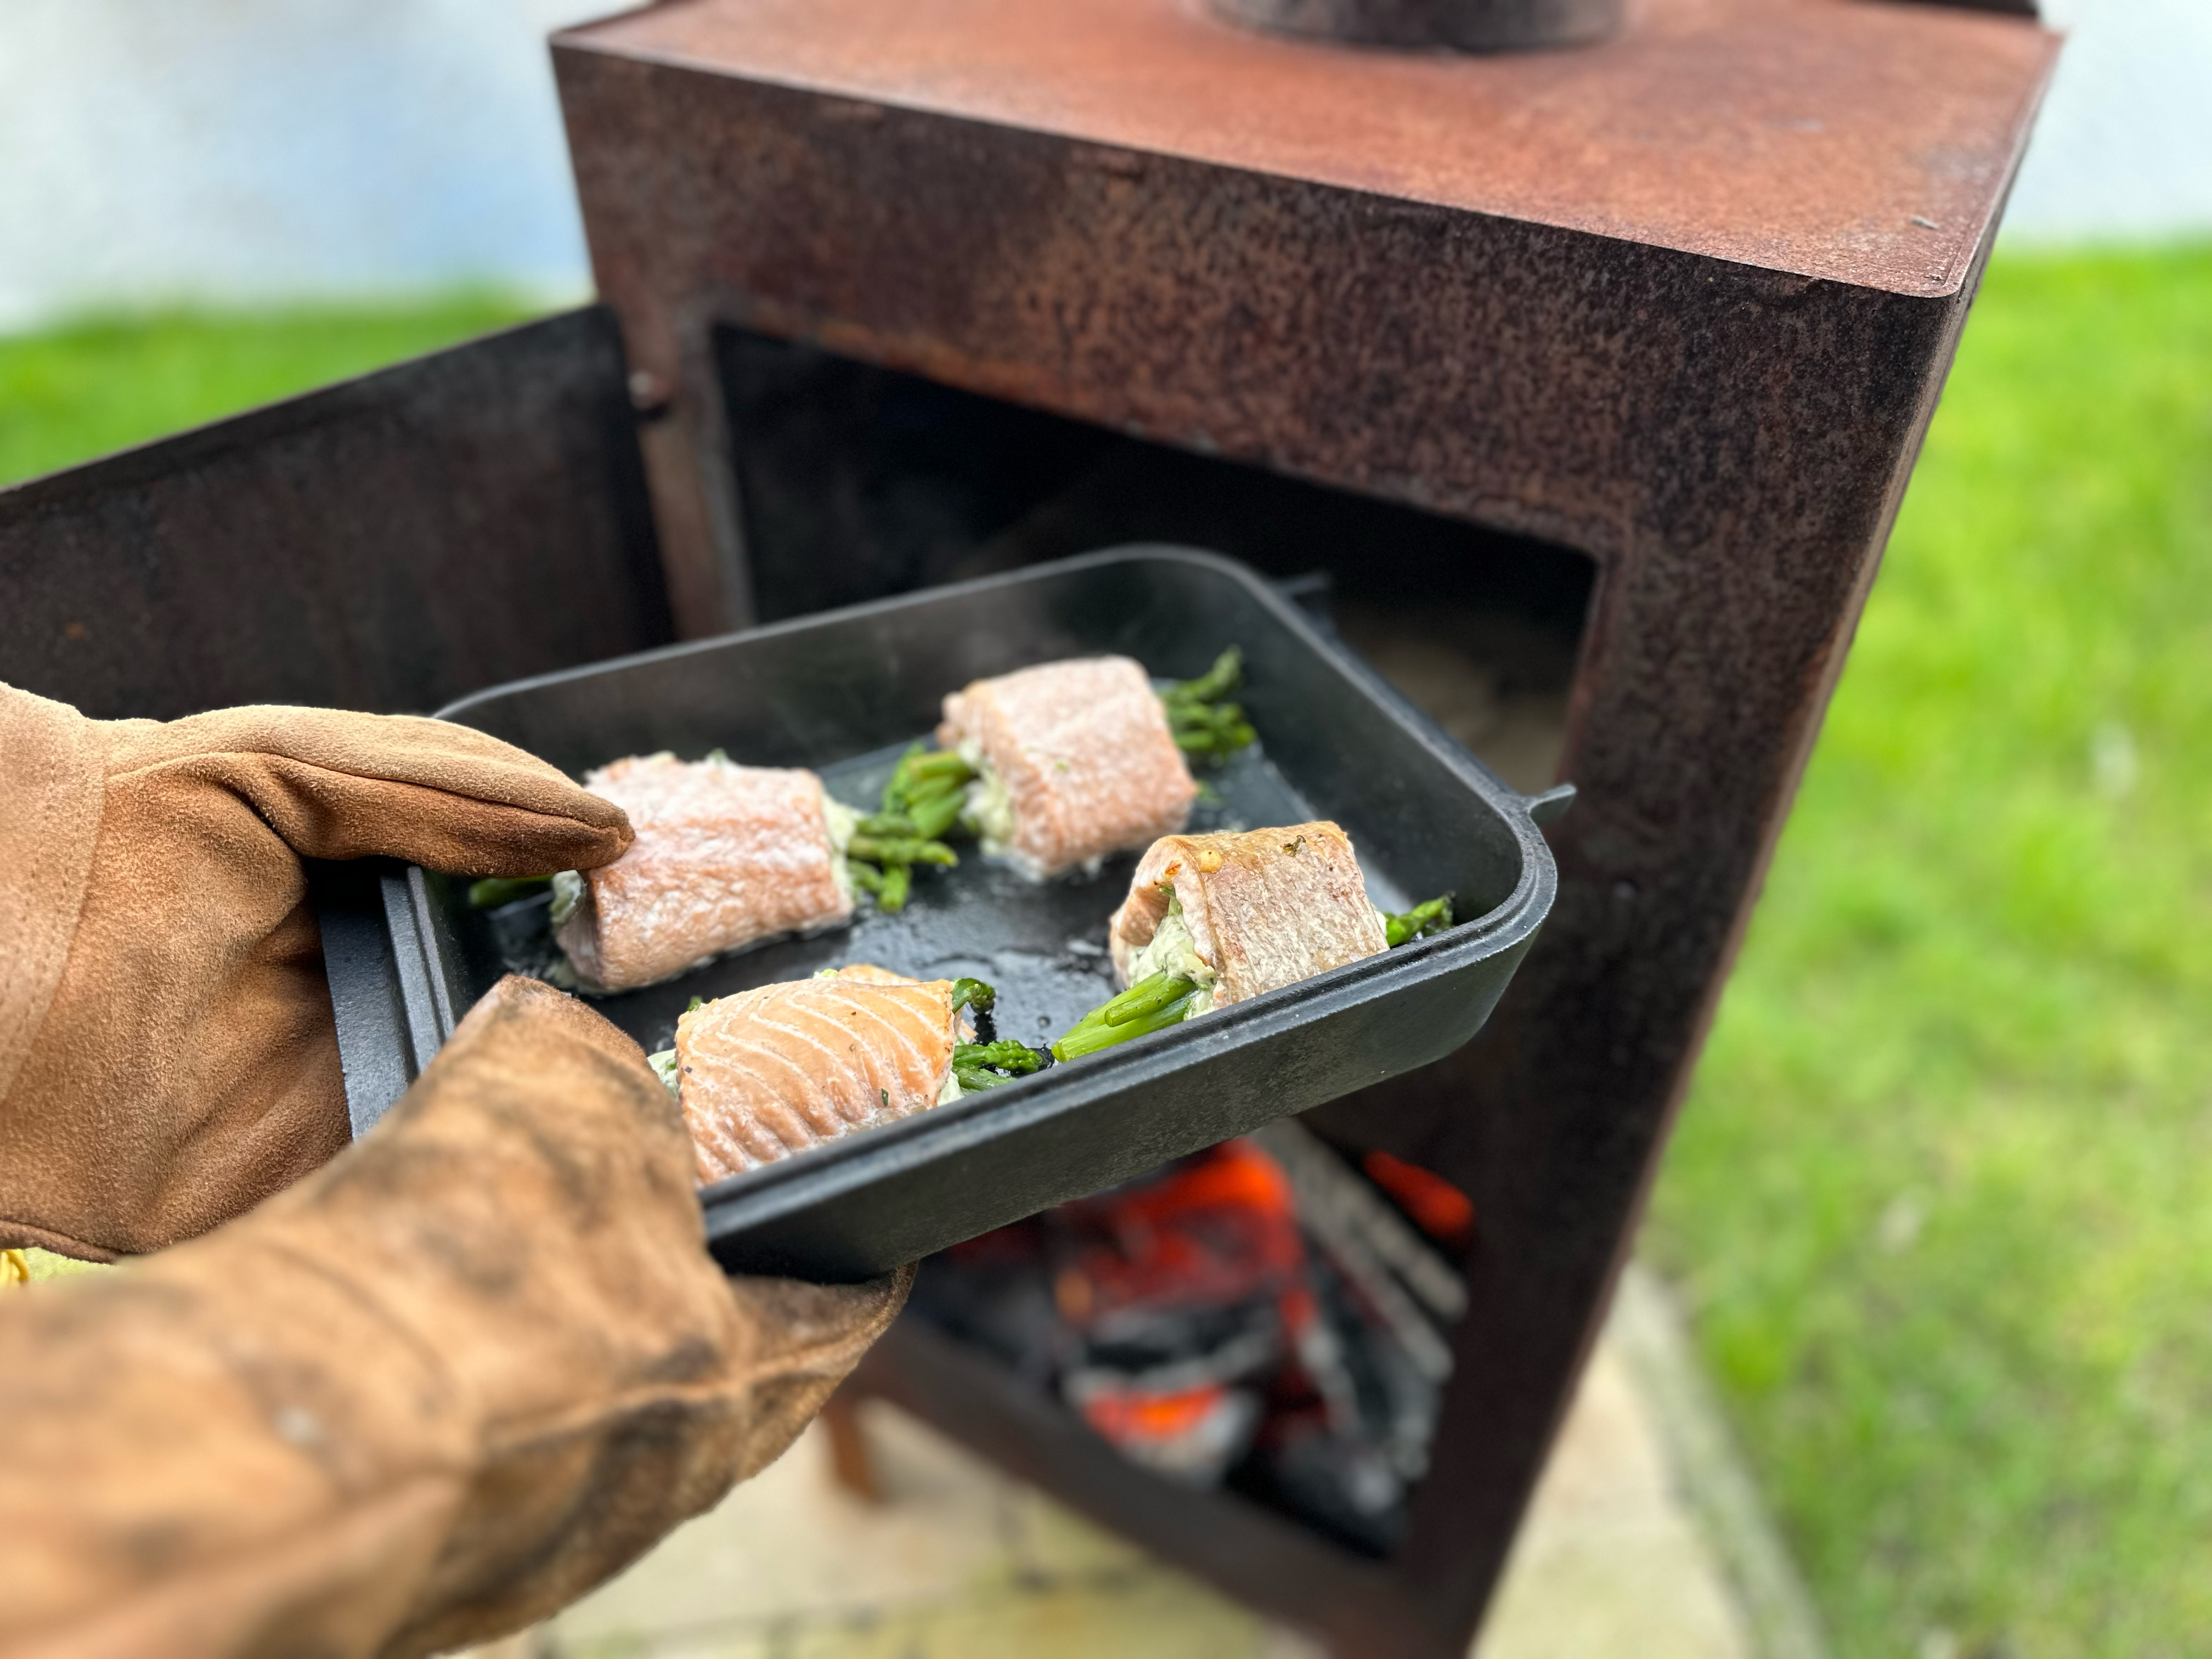 Outdooroven recipe: Salmon rolls with asparagus